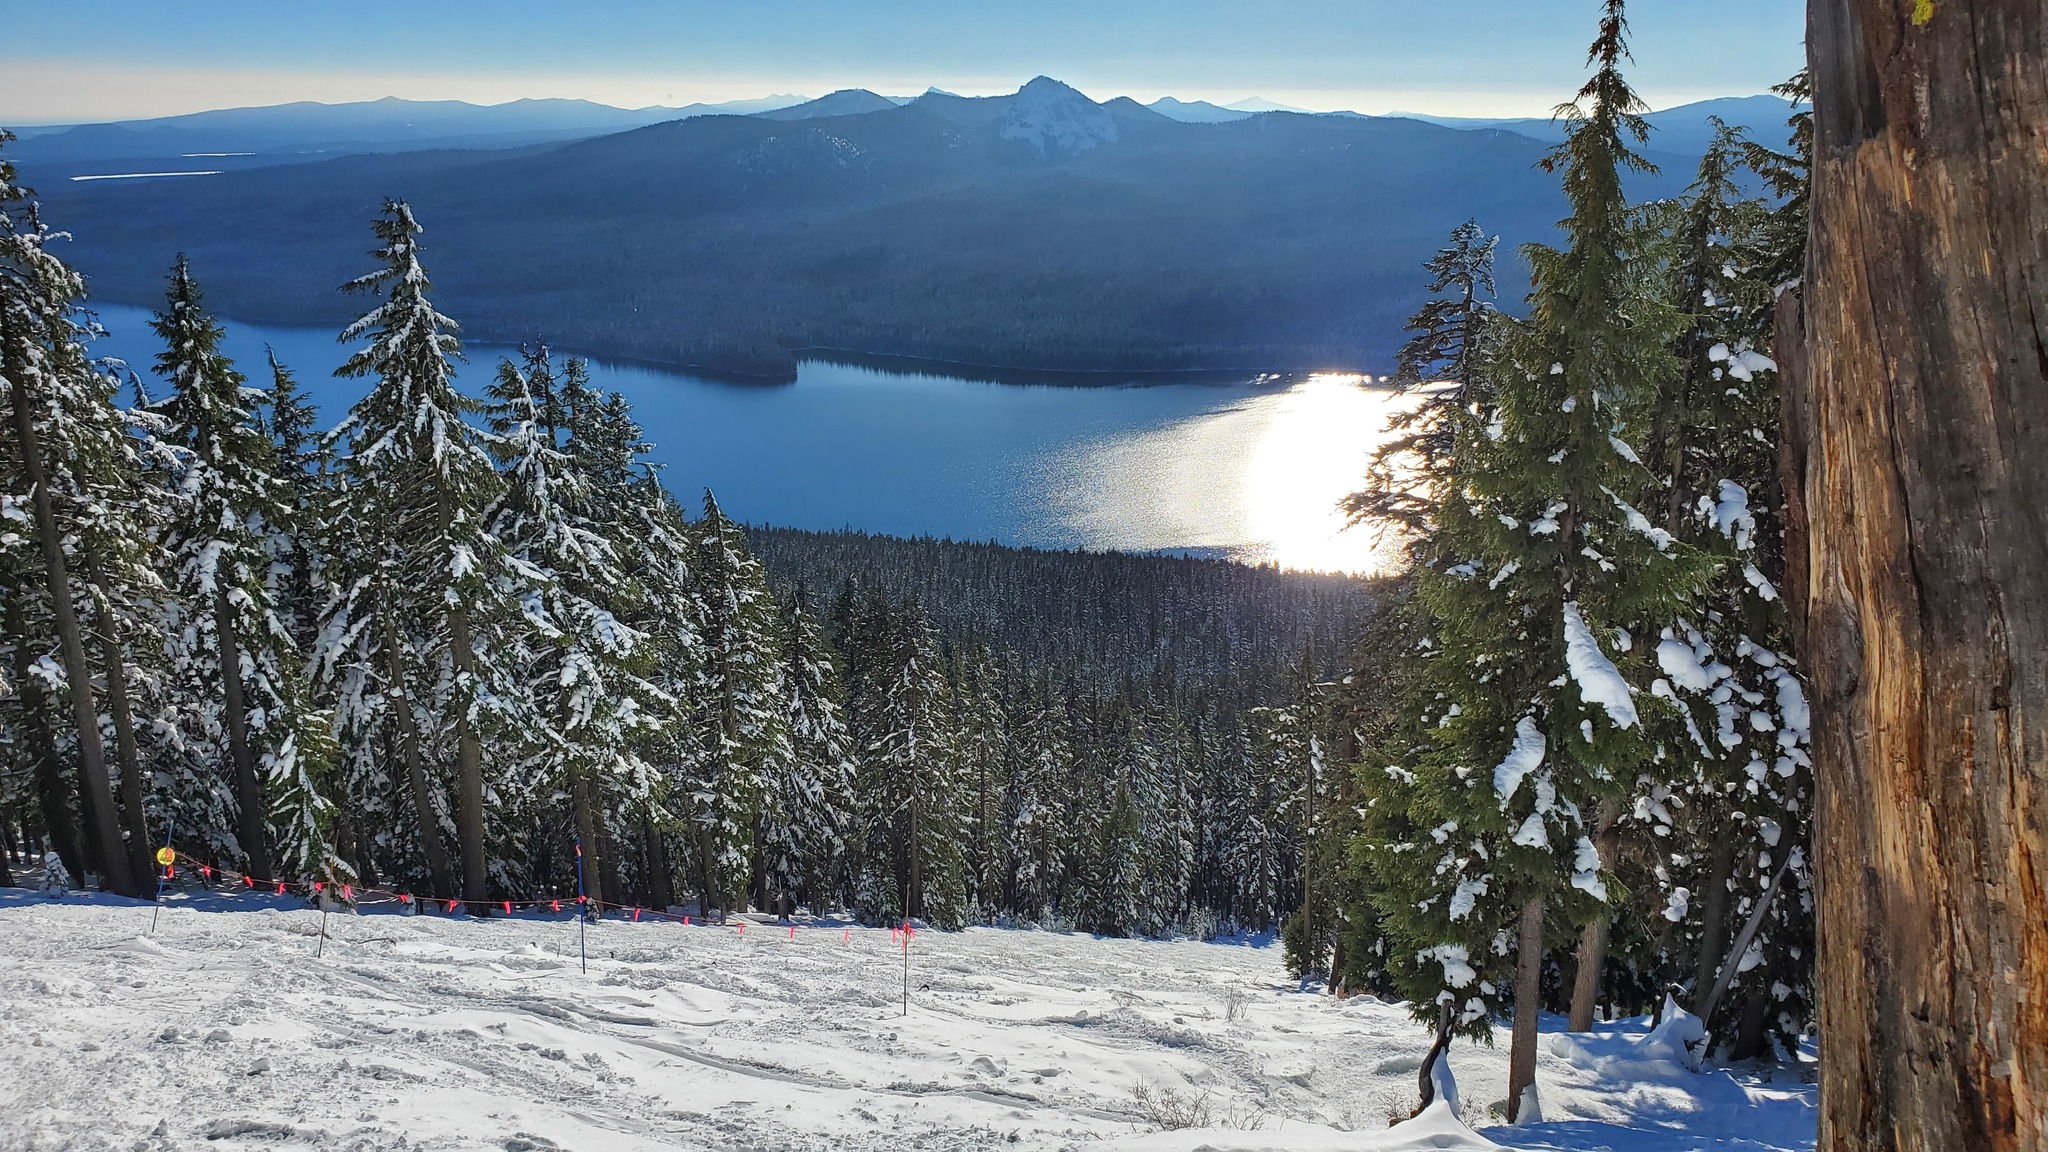 A lake as seen from the top of Willamette Pass Ski resort.